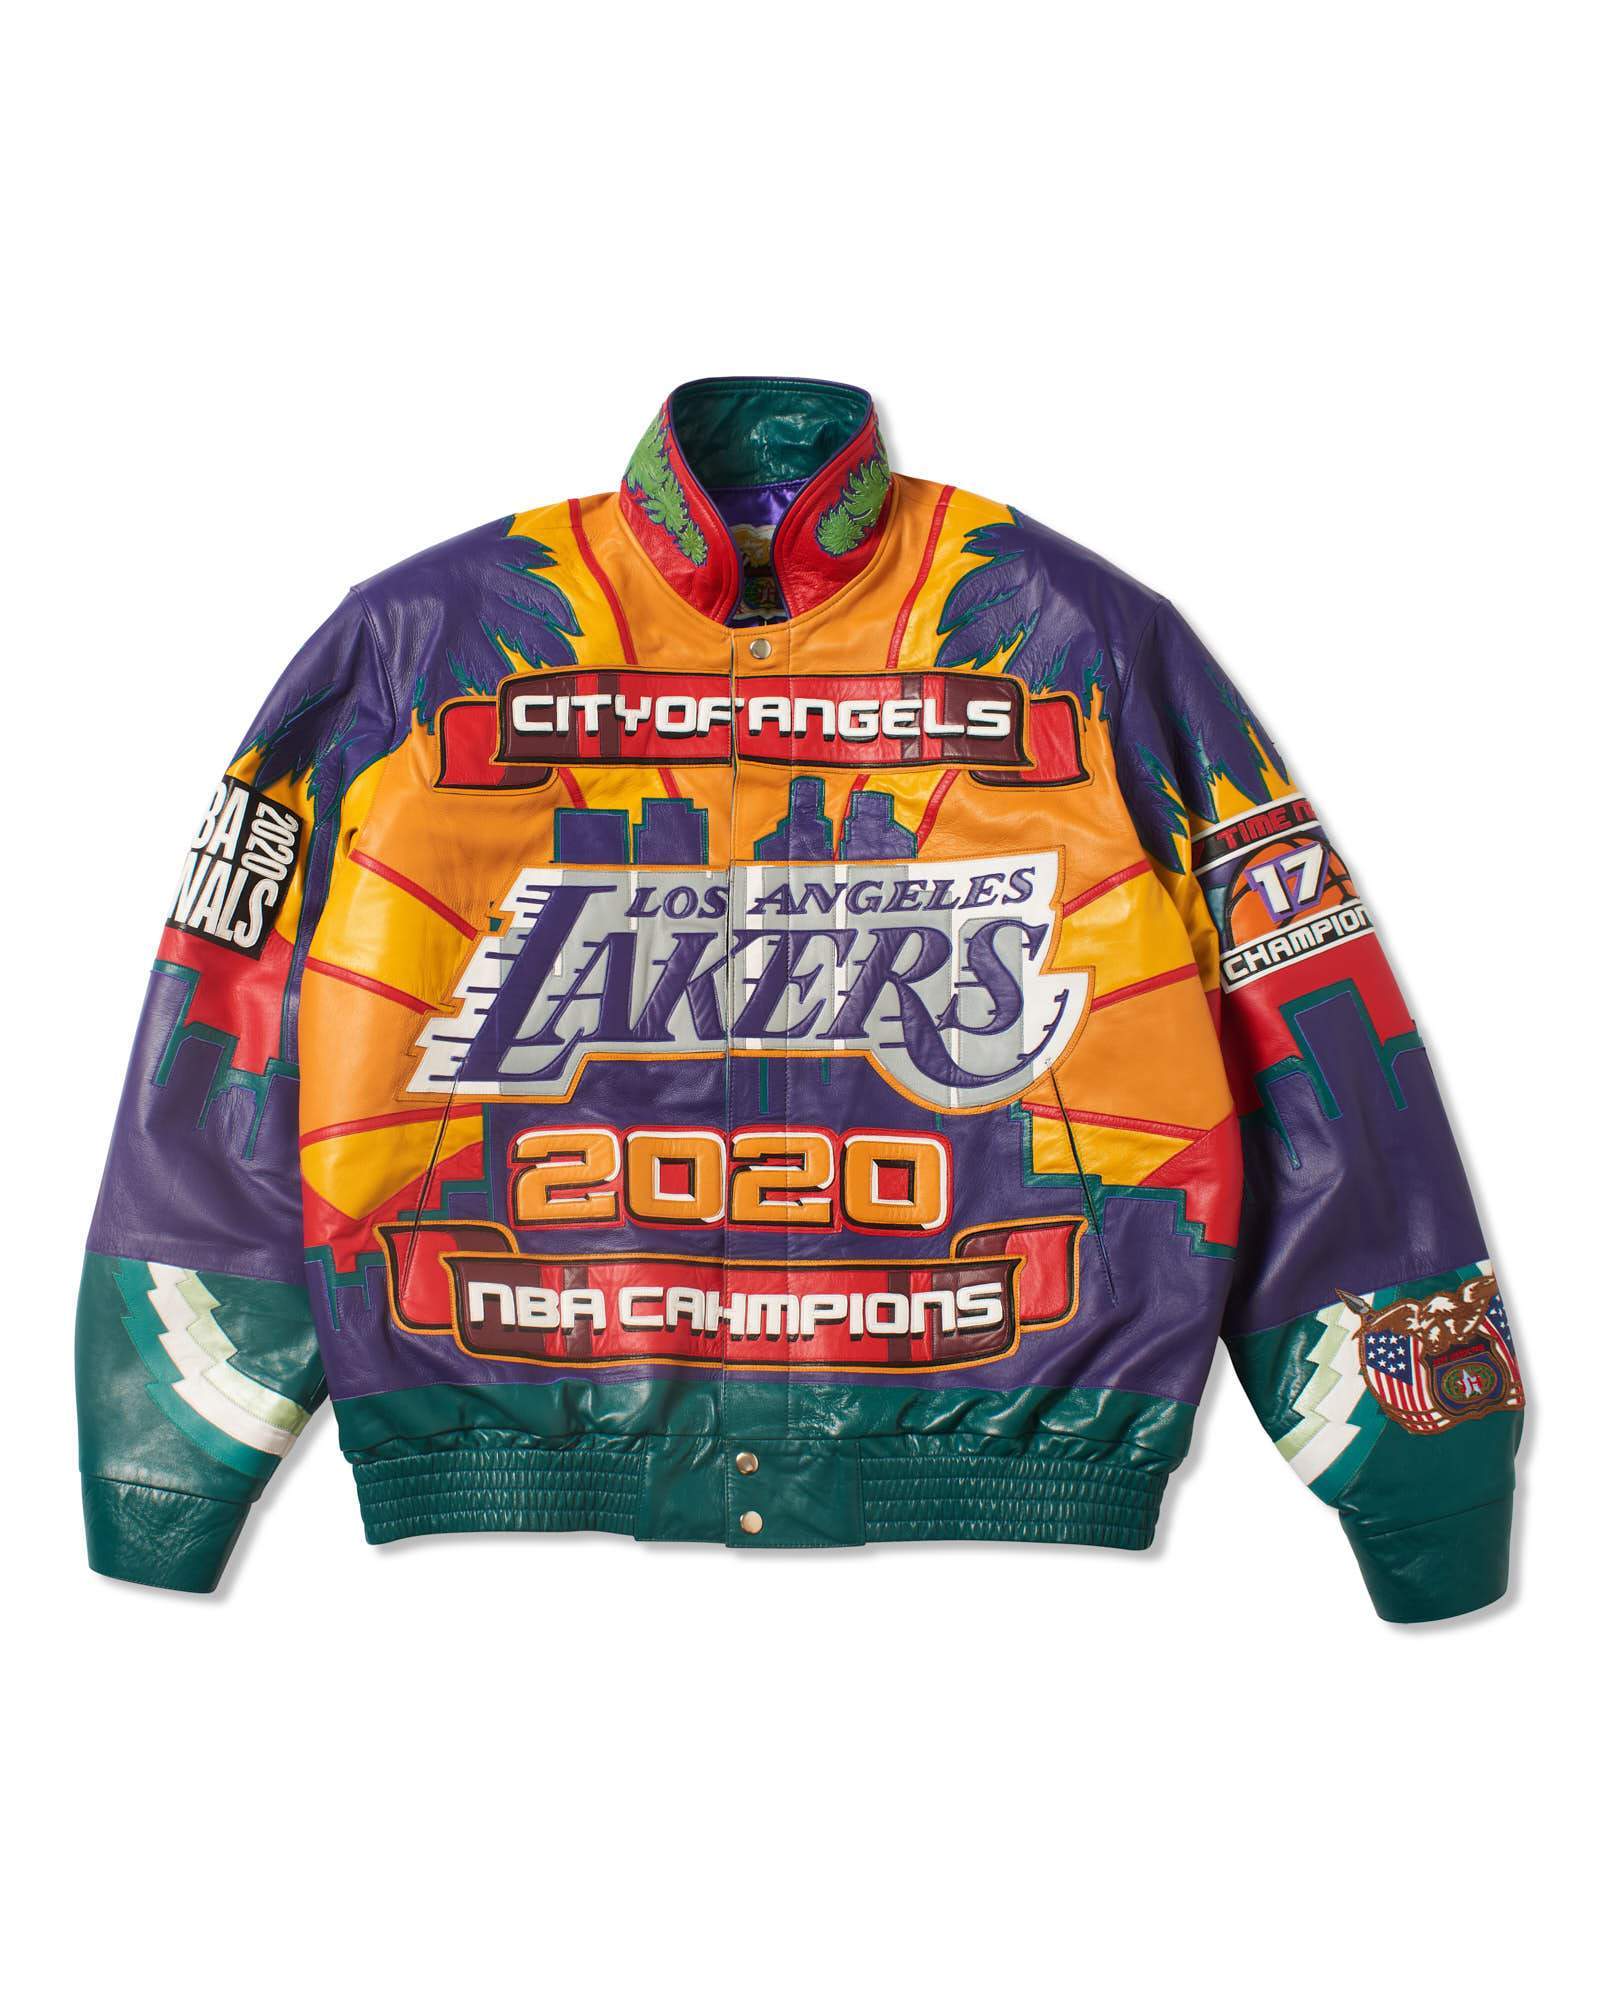 lakers leather jacket